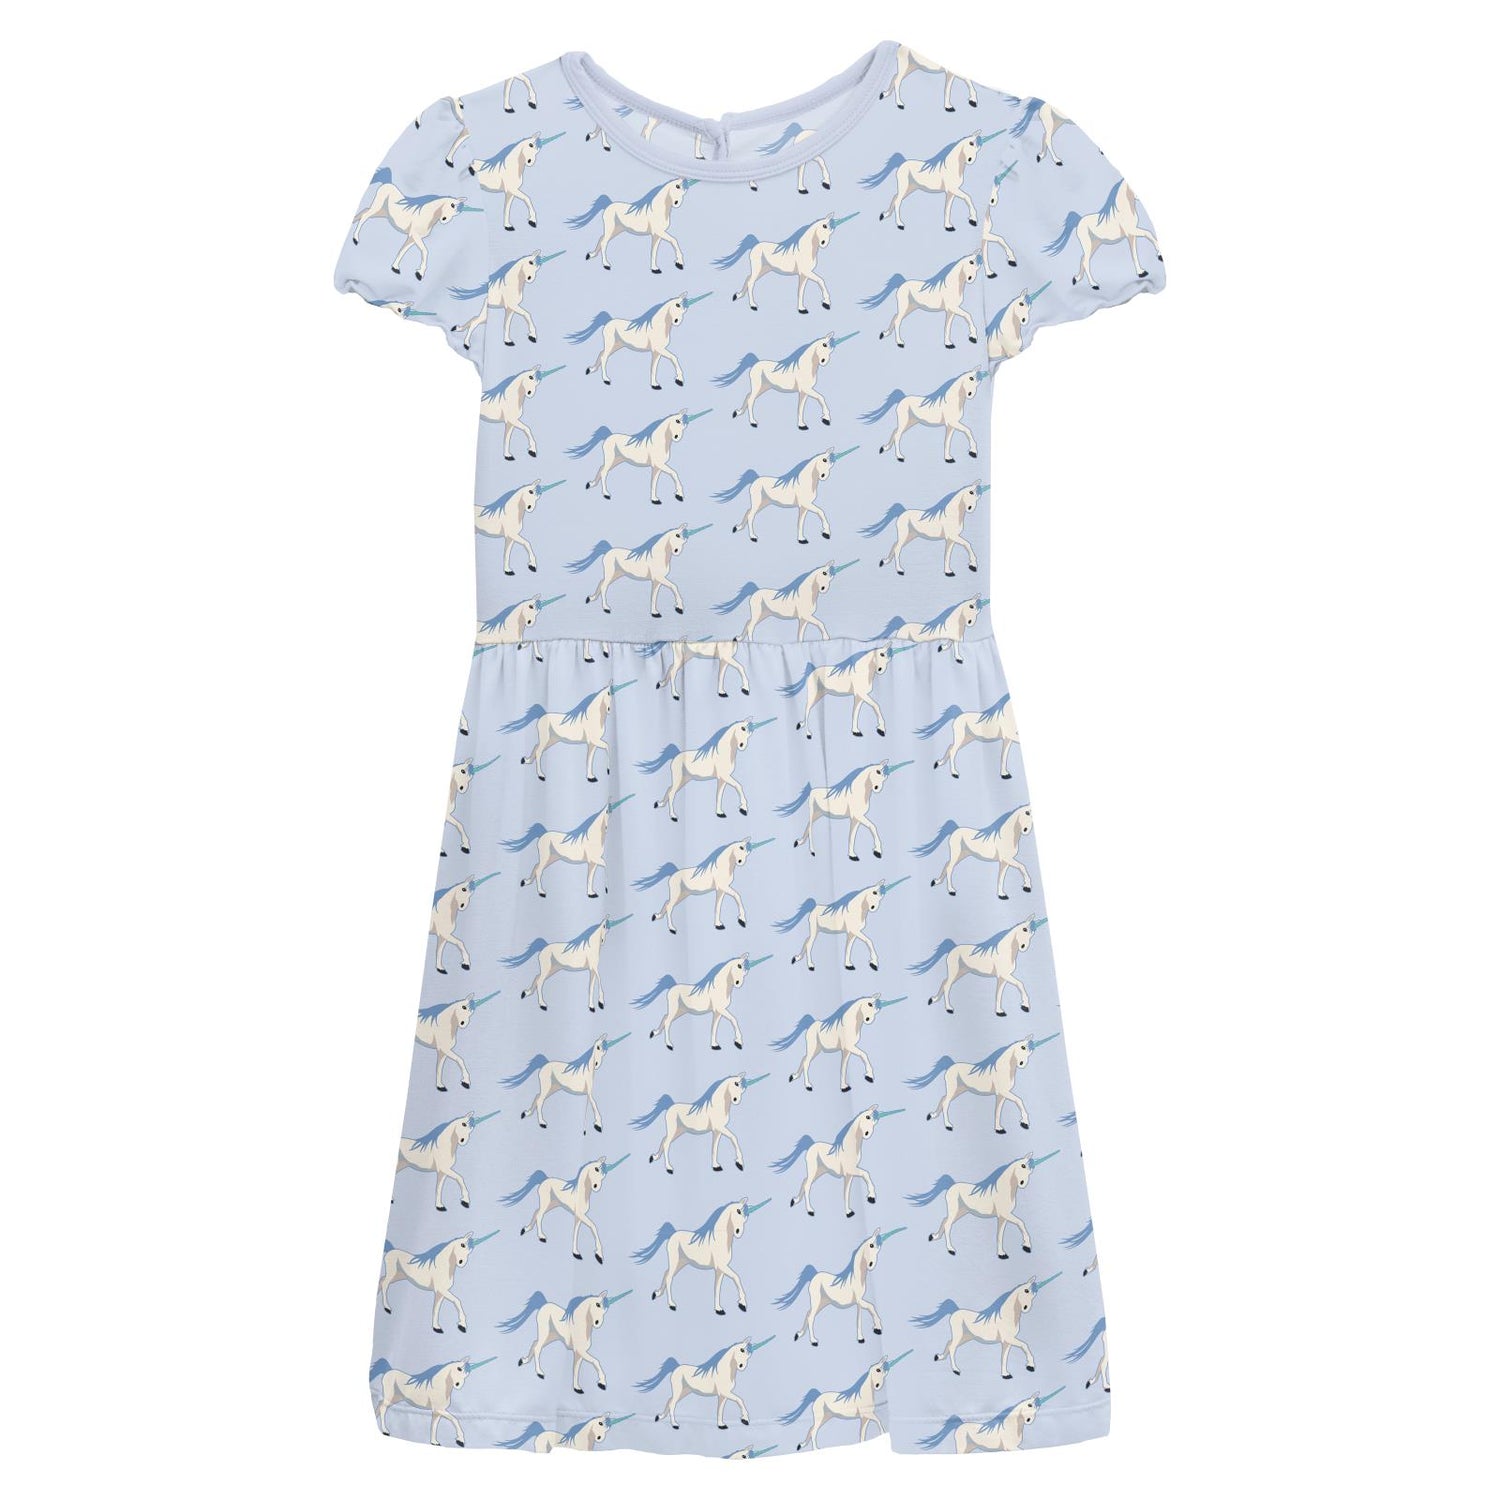 Print Flutter Sleeve Twirl Dress with Pockets in Dew Prancing Unicorn